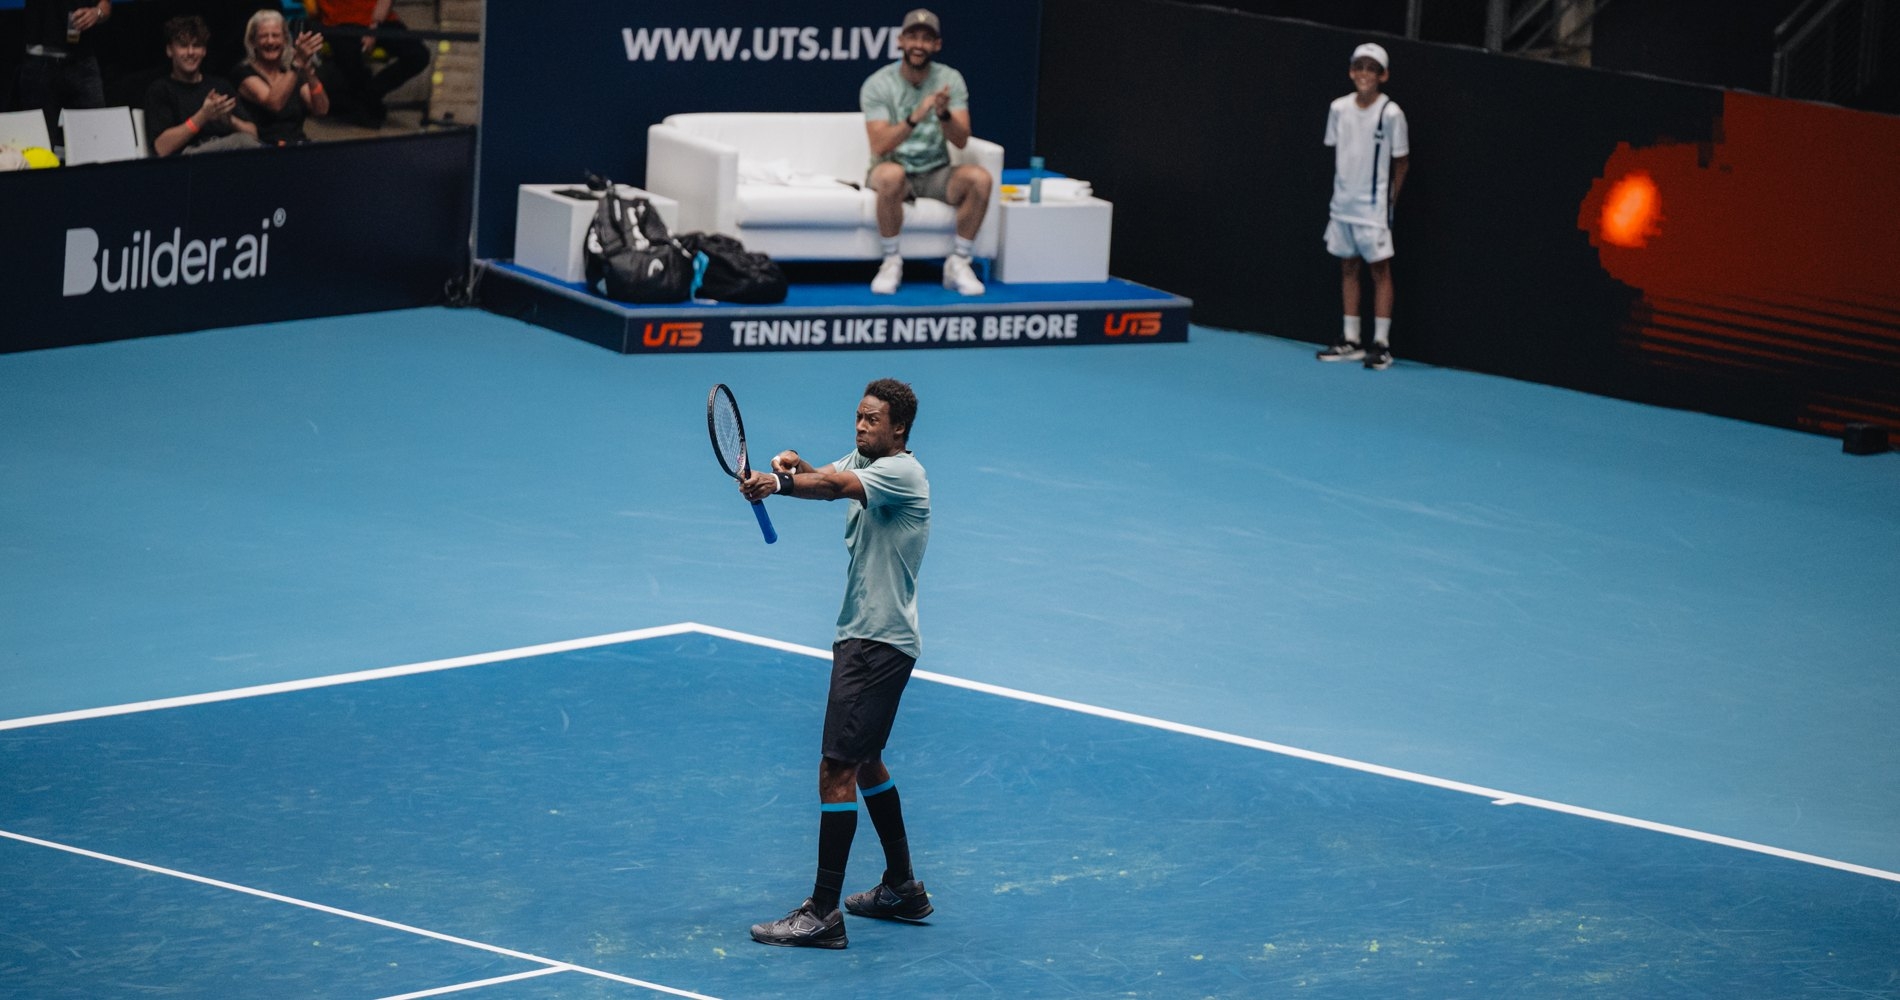 UTS experience fits Monfils like a glove